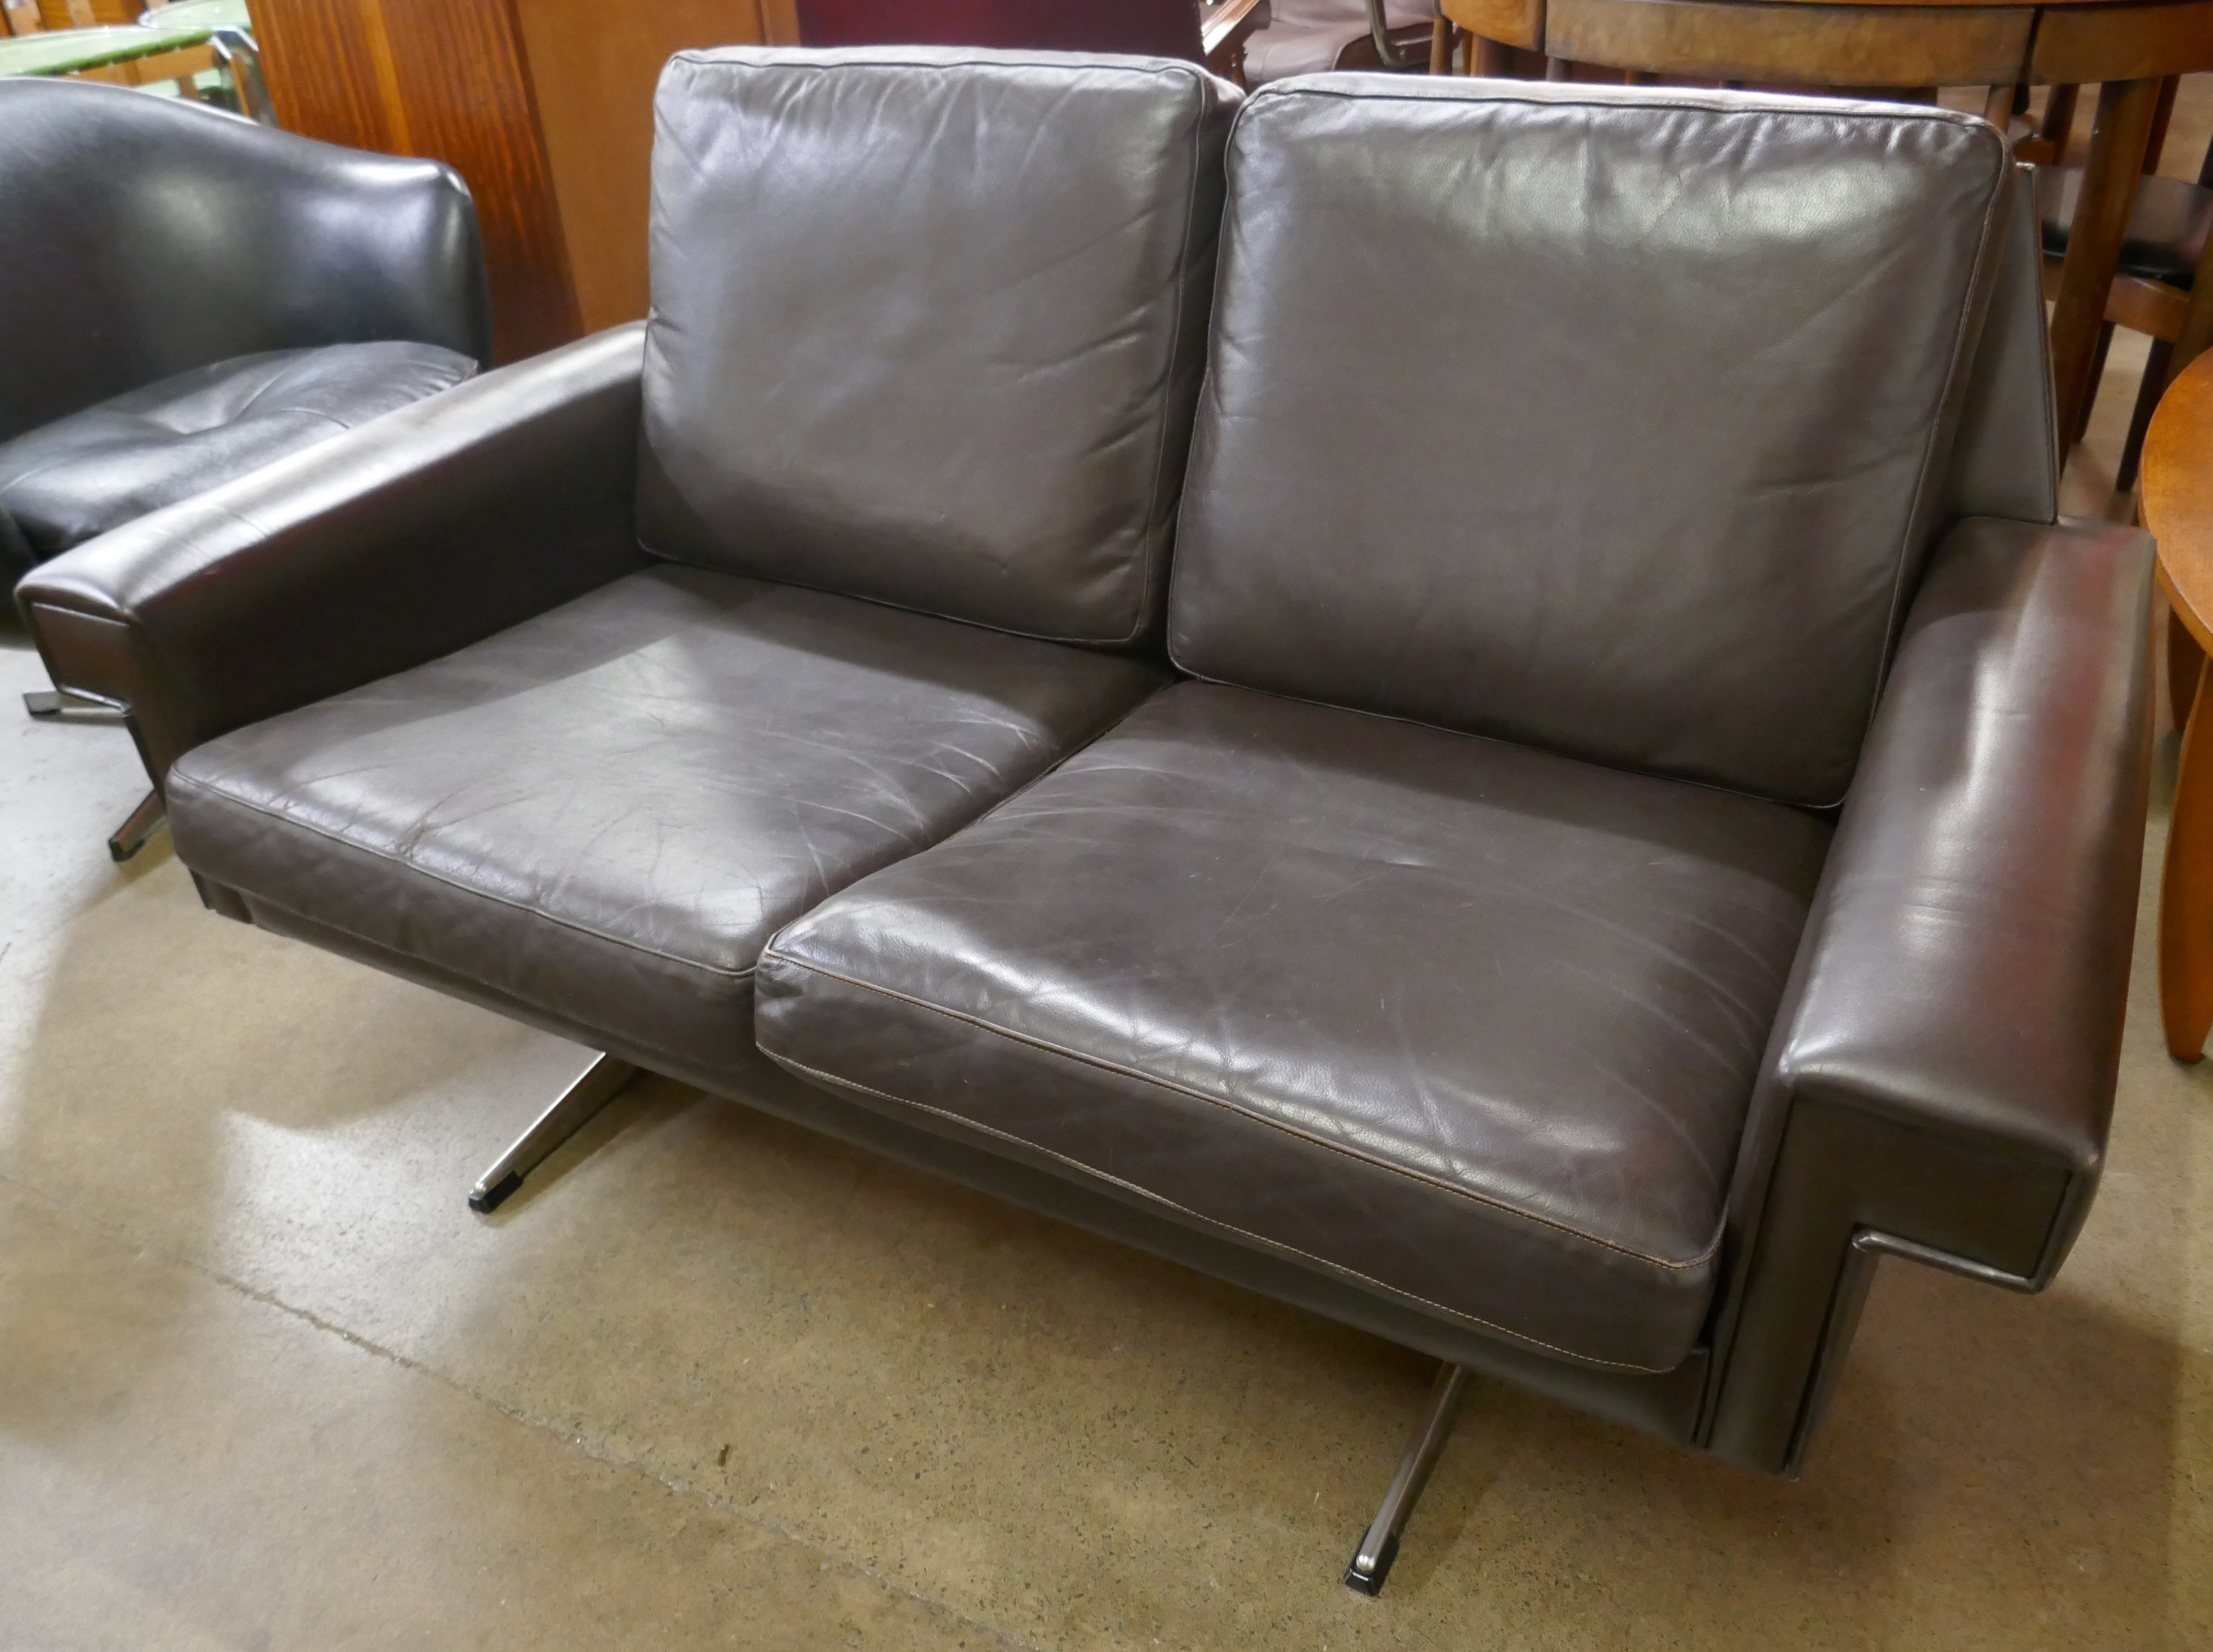 A Danish Stouby black leather two seater sofa